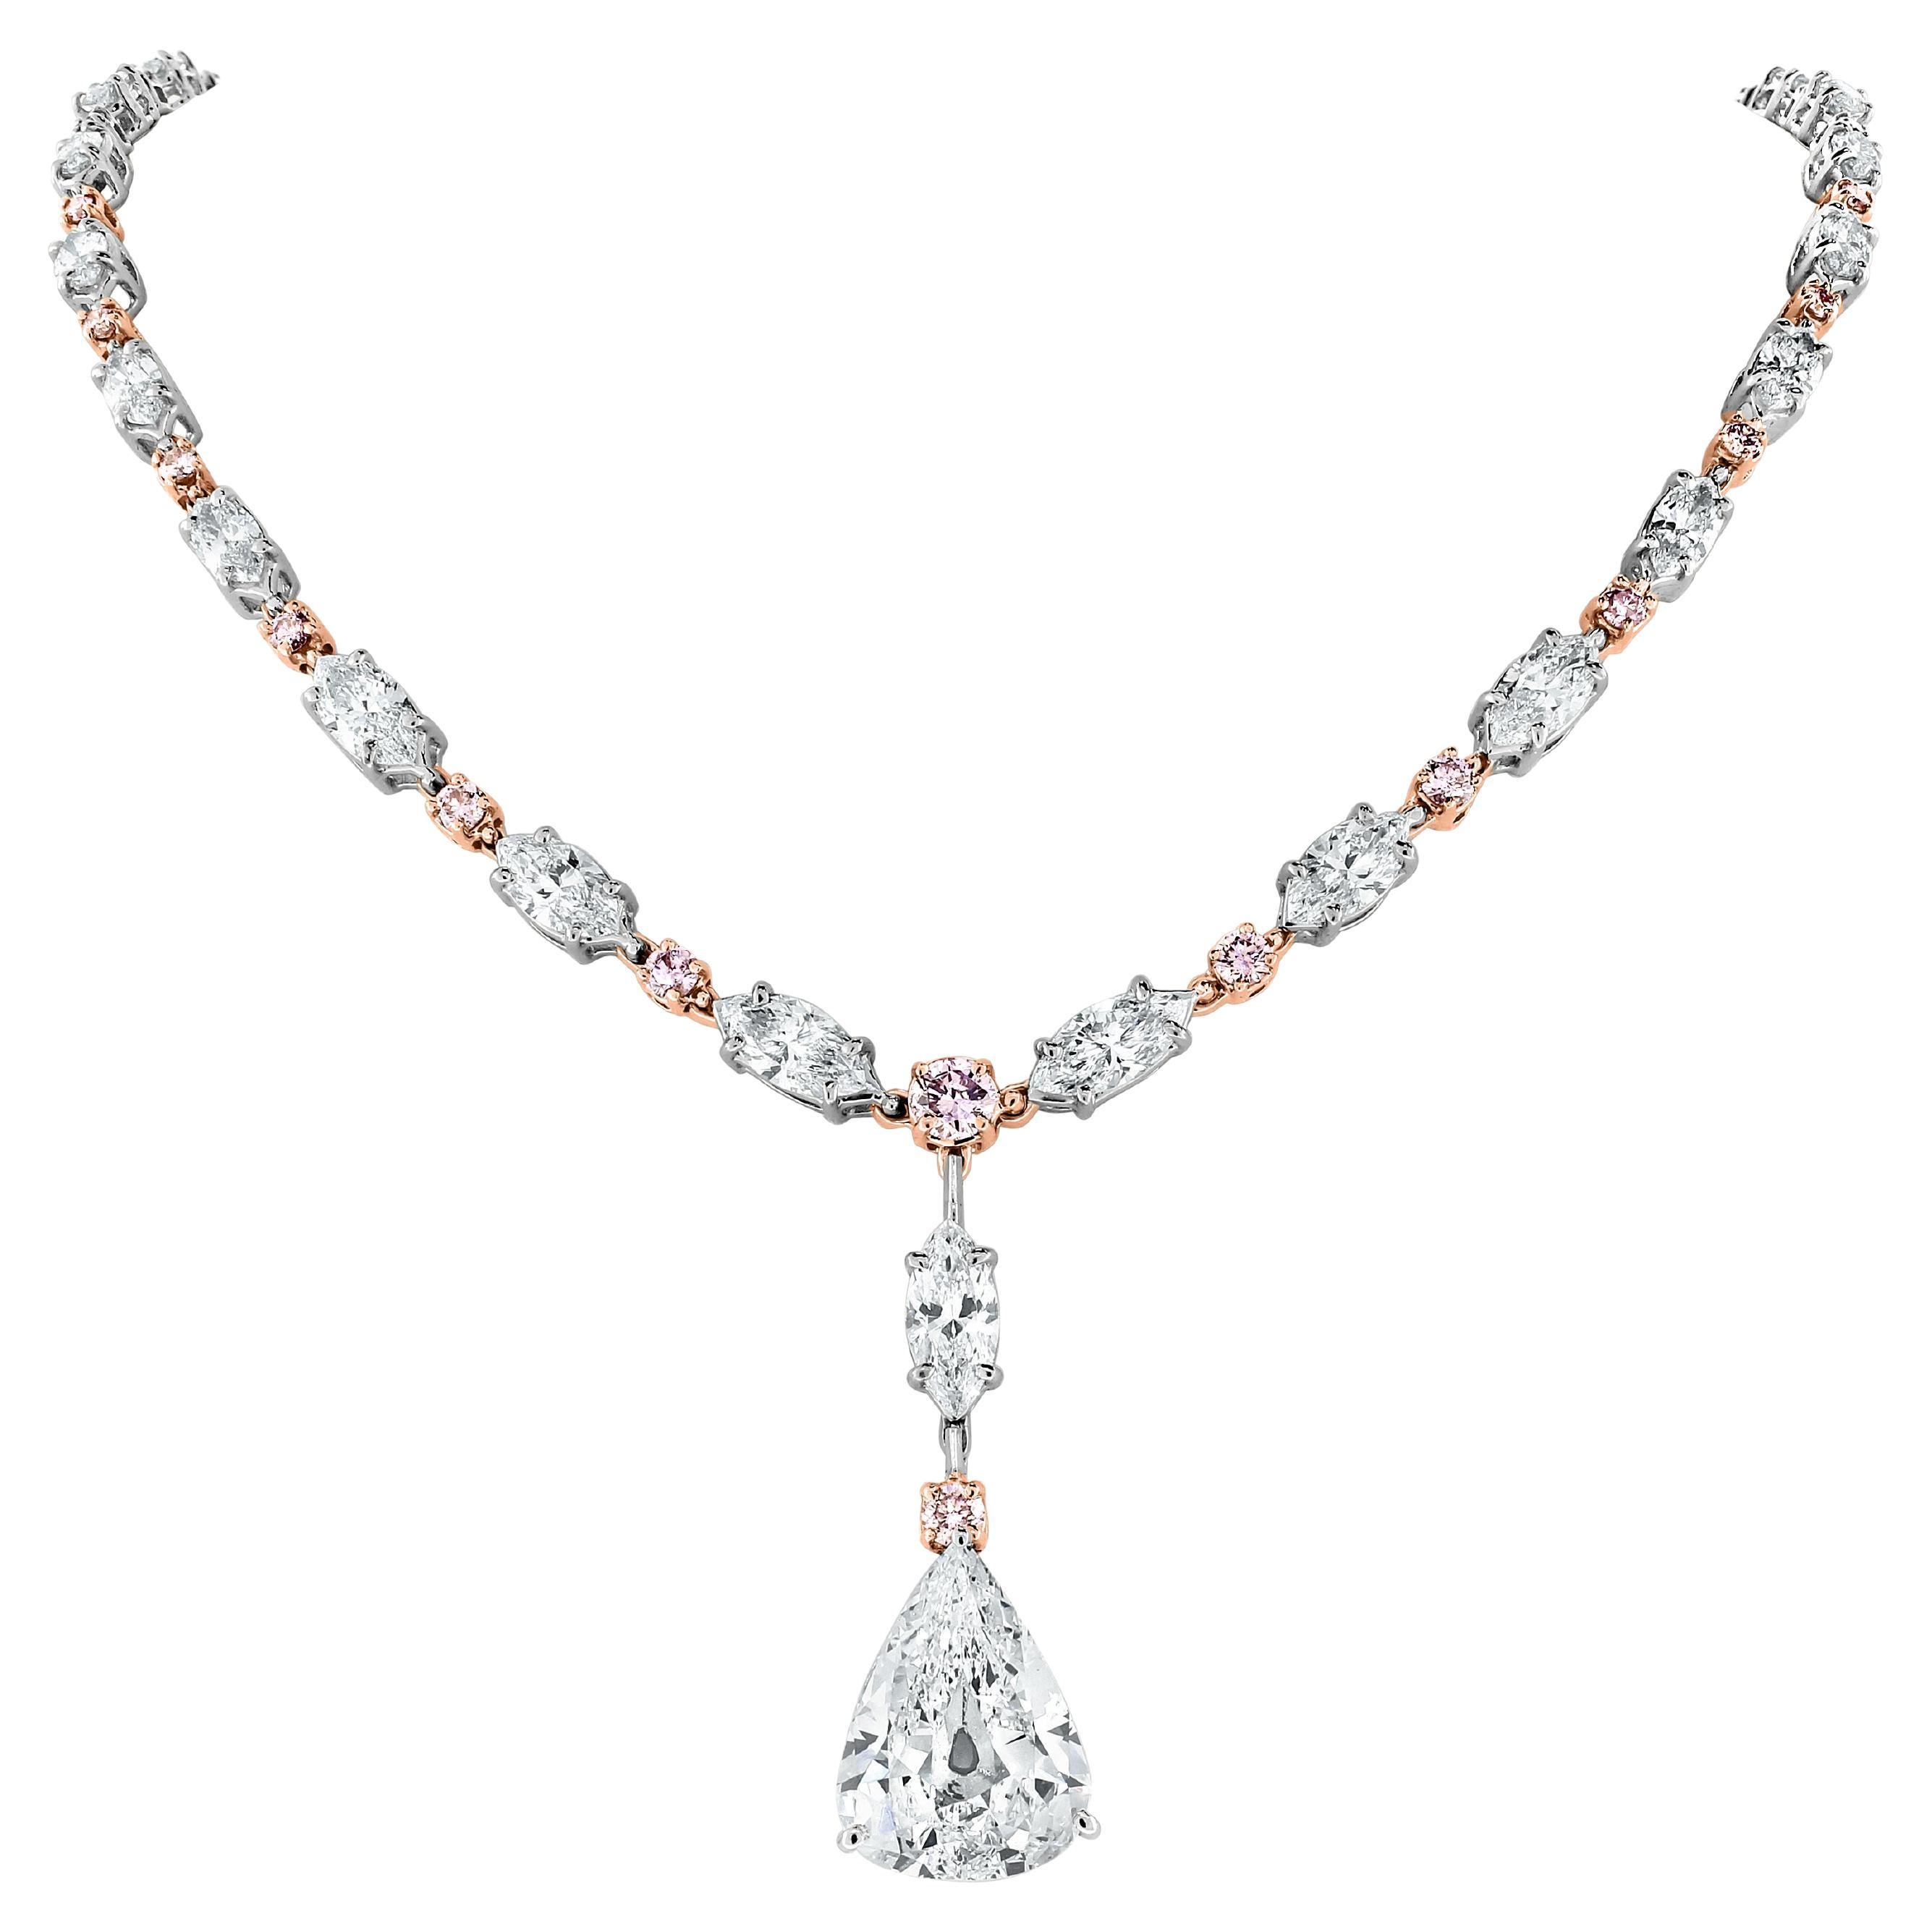 Beauvince Ariana Diamond Necklace, '17.76 Ct Diamonds', in Gold